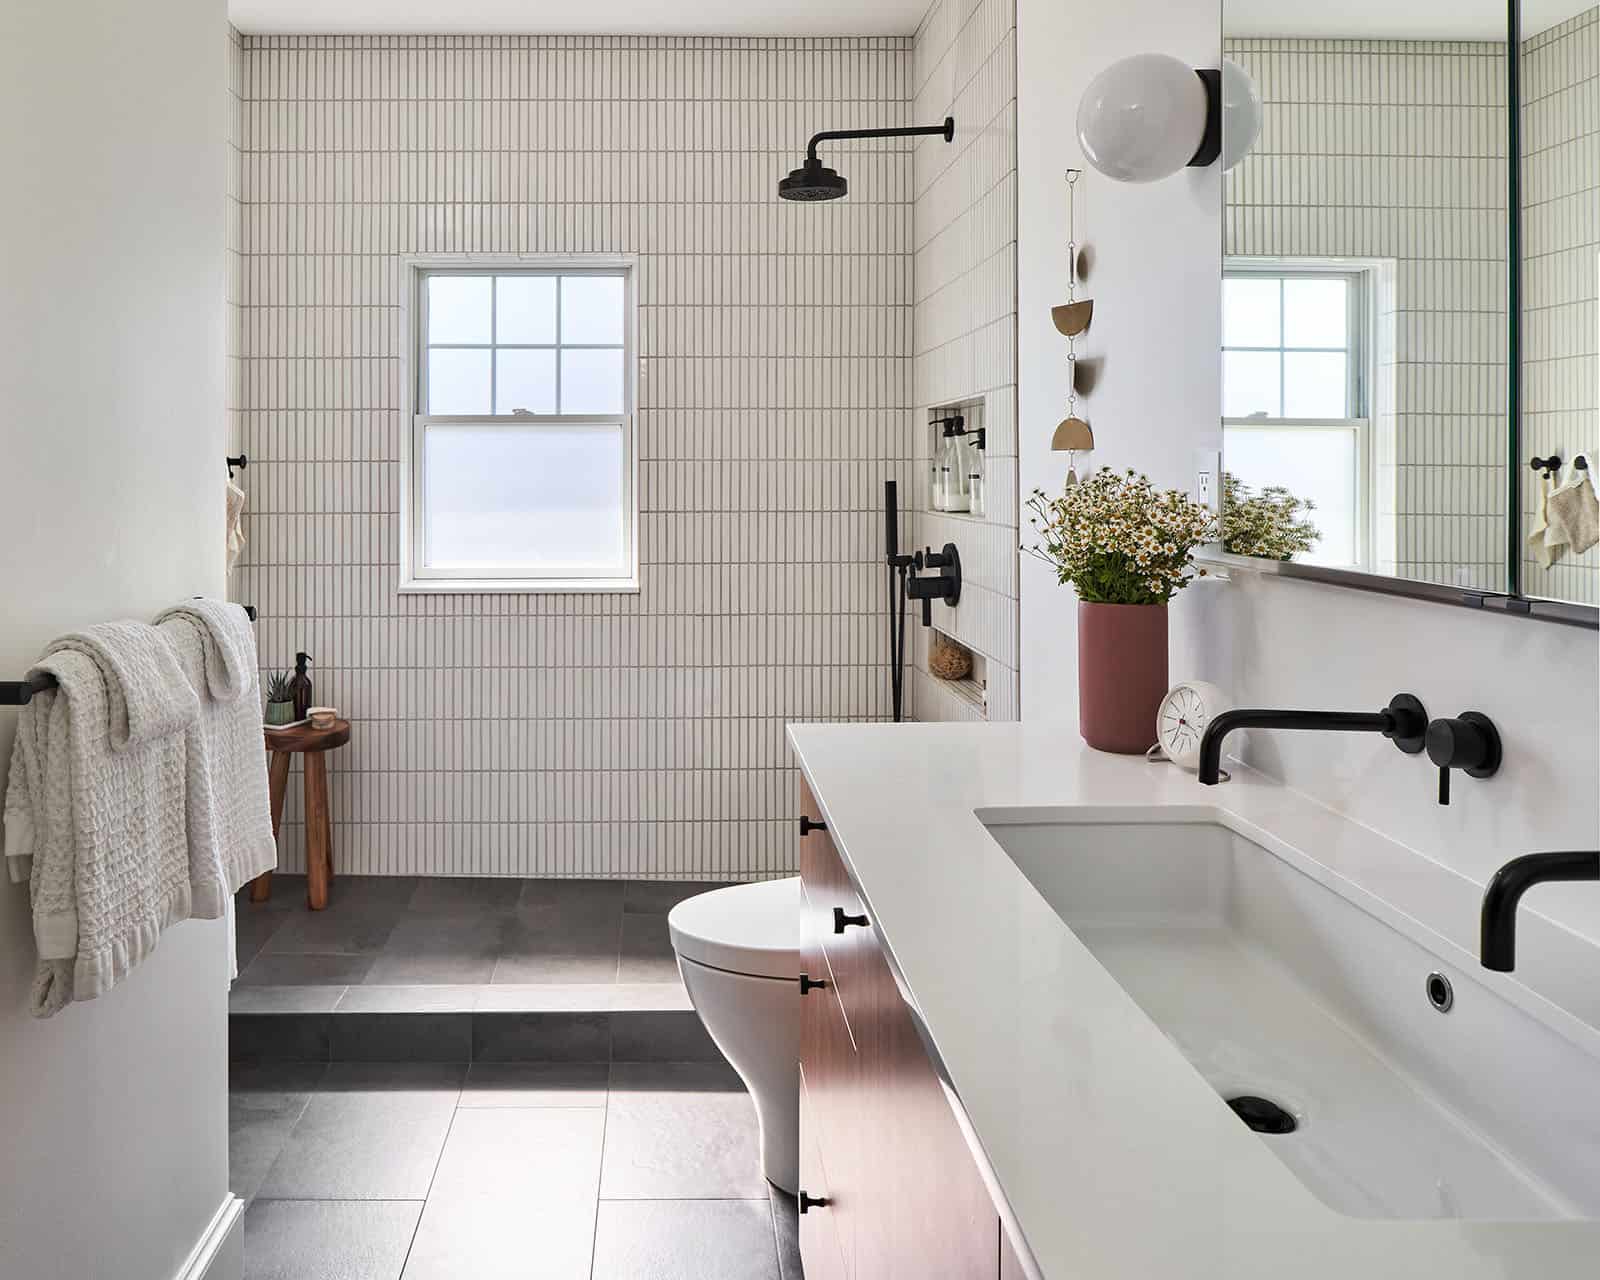 Luxury Bathrooms You Have to See to Believe